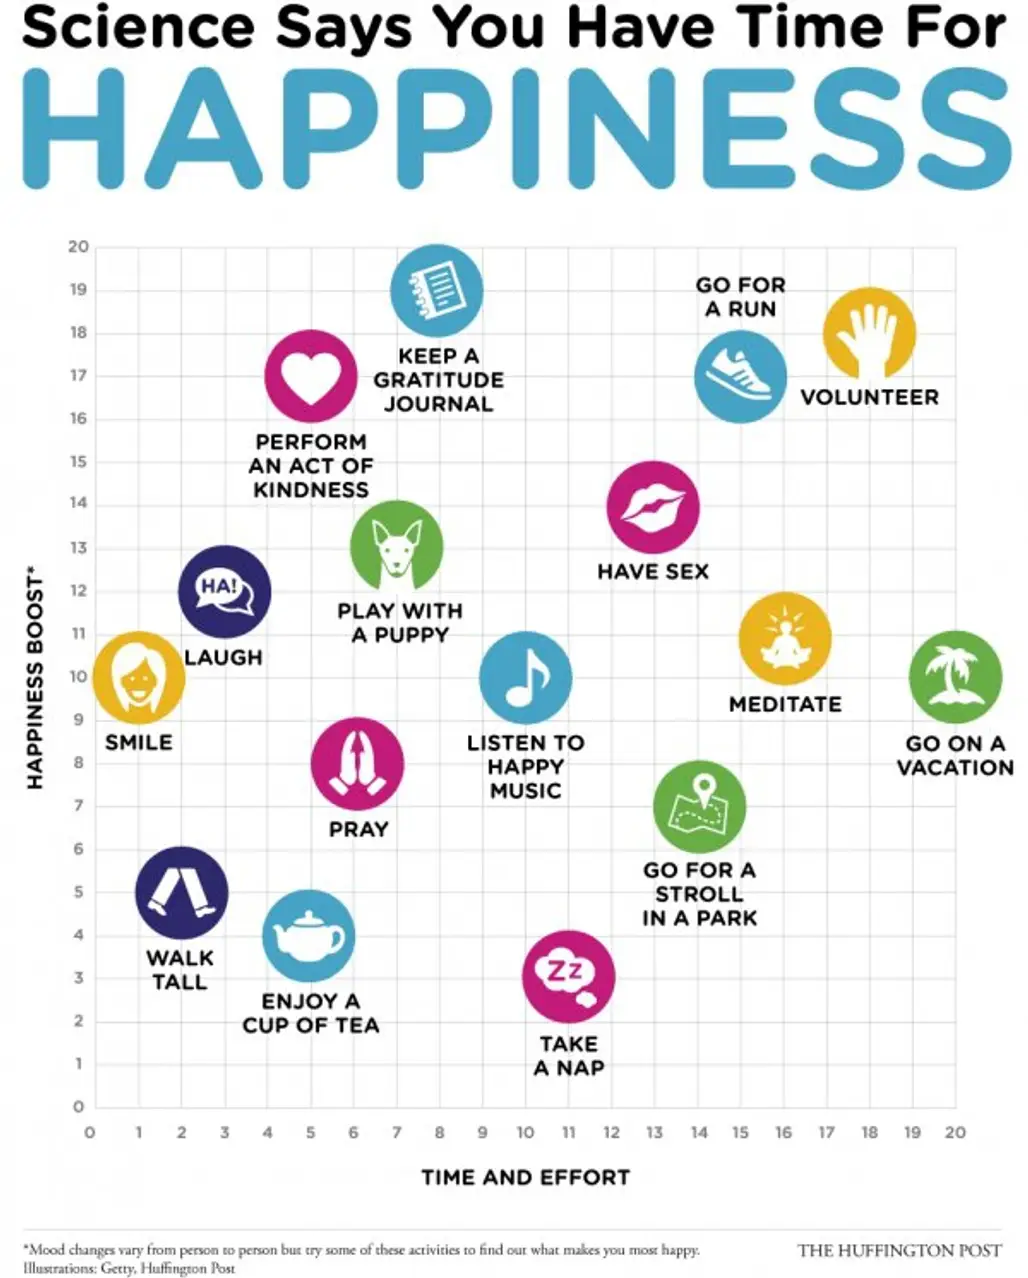 Science Says You Have Time for Happiness